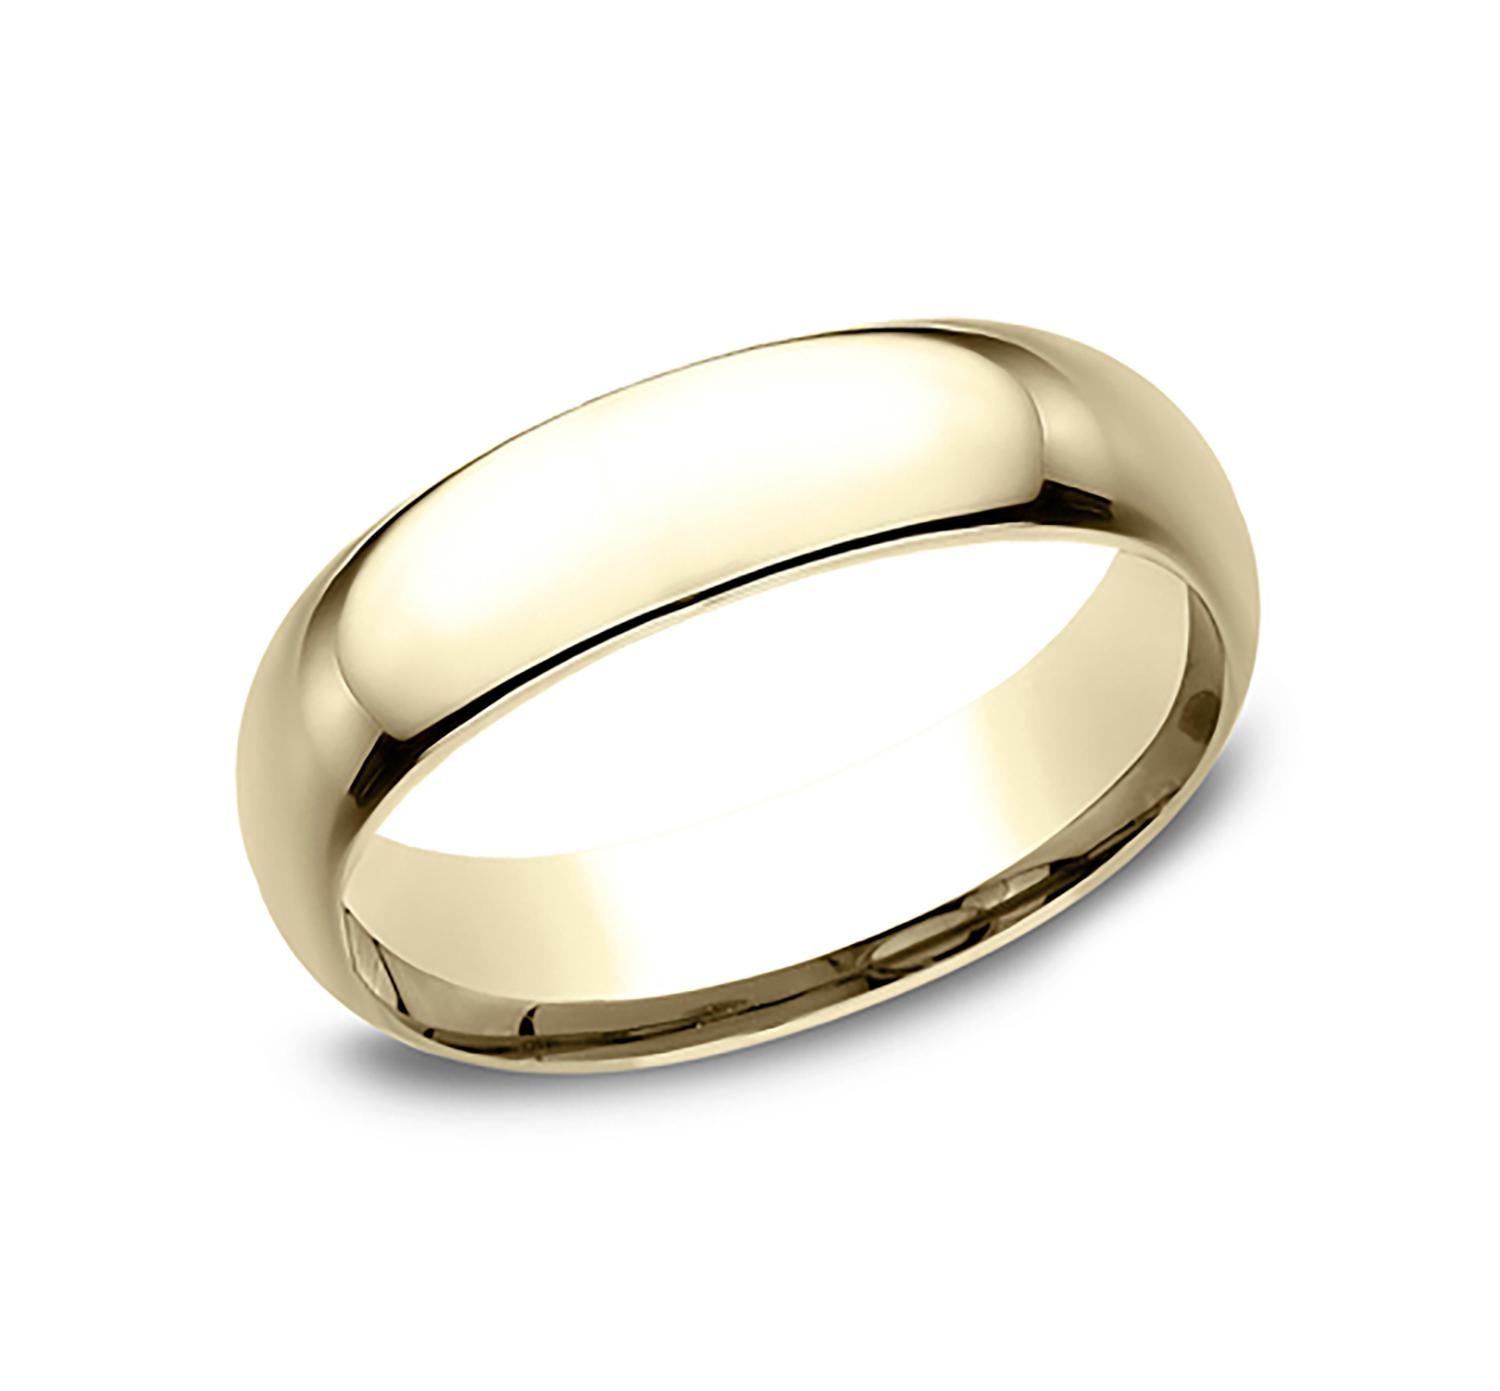 Benchmark wedding band in 14K yellow gold polished finish. Width 6mm, high dome comfort fit. Custom engraving and finishing available. Size 9 US and resizable upon request. Available in 1/4, 1/2, and 3/4 sizes, for more information please message us